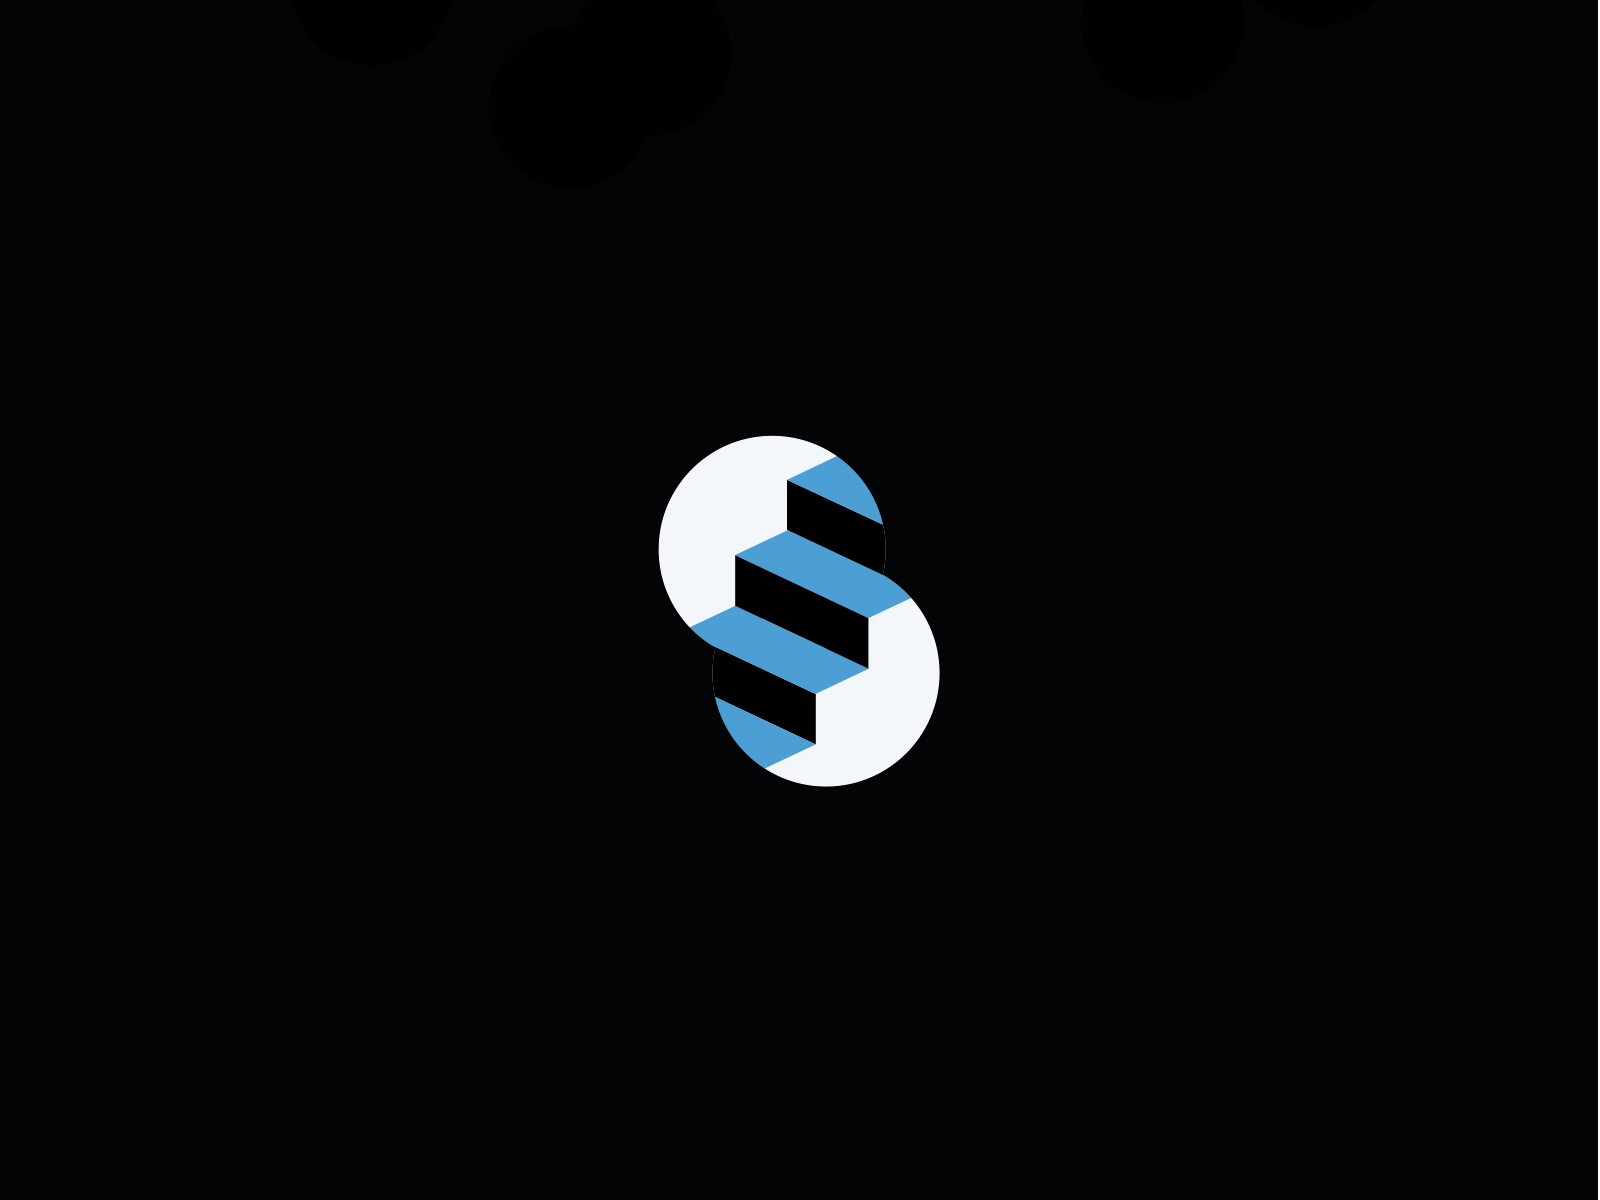 Stairs Animation / Letter S by Sergio Joseph on Dribbble